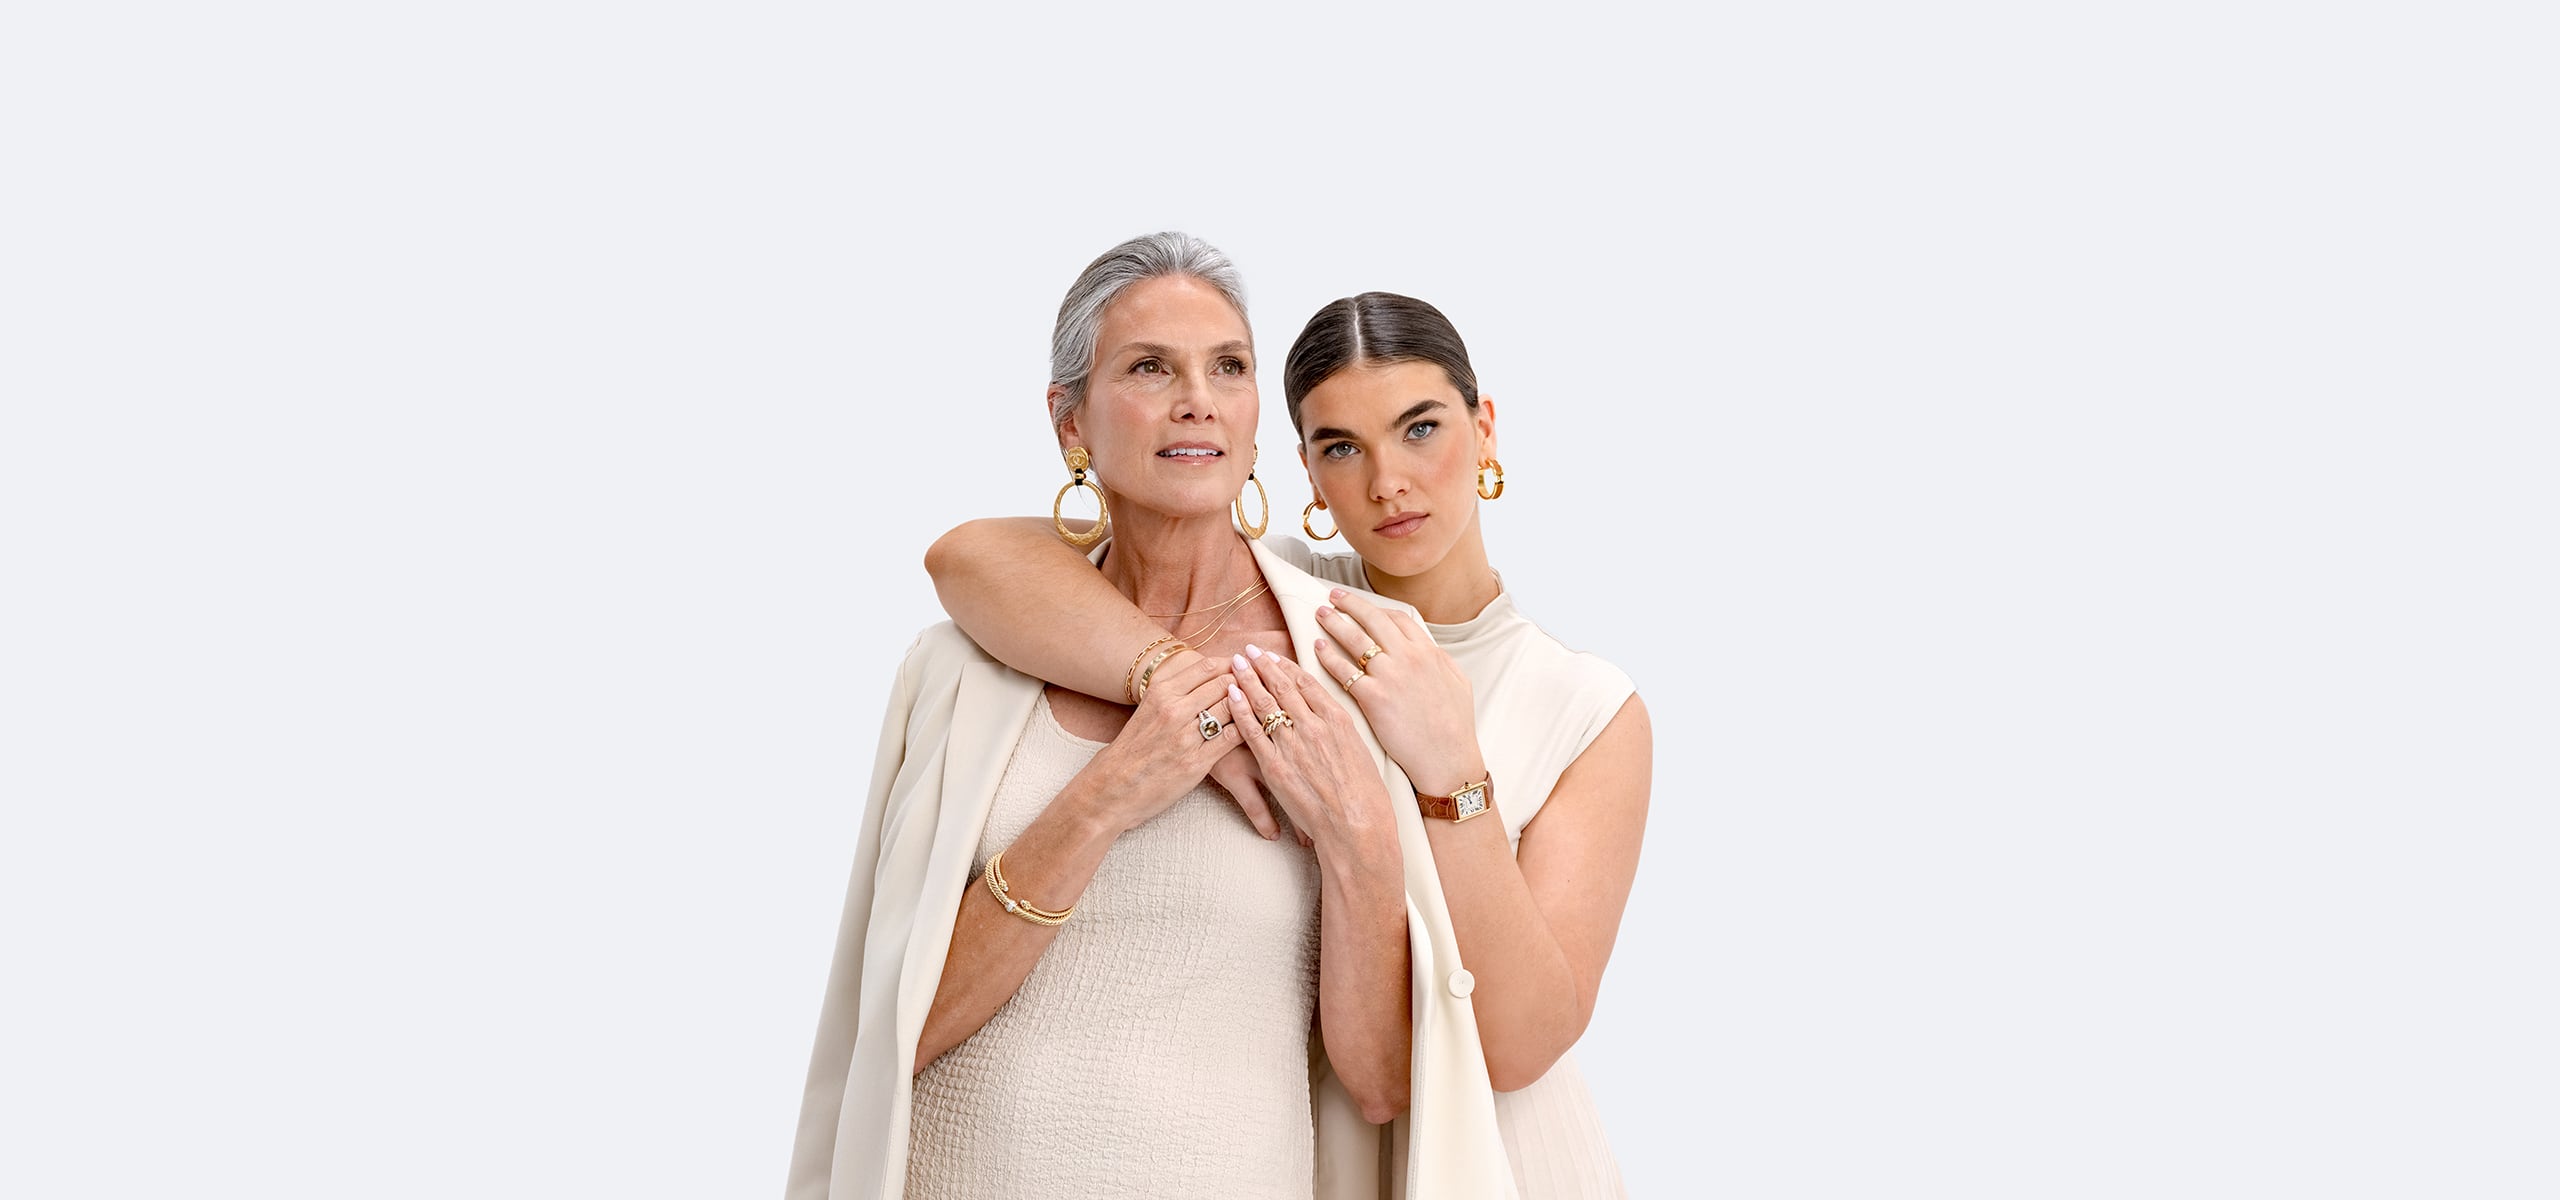 one woman wearing a beige sleeve dress with a beige blazer over her shoulders and wearing gold Chanel hoop drop earrings and another woman wearing a beige sleeveless dress, an Hermes tan strap watch, and Hermes gold hoop earrings